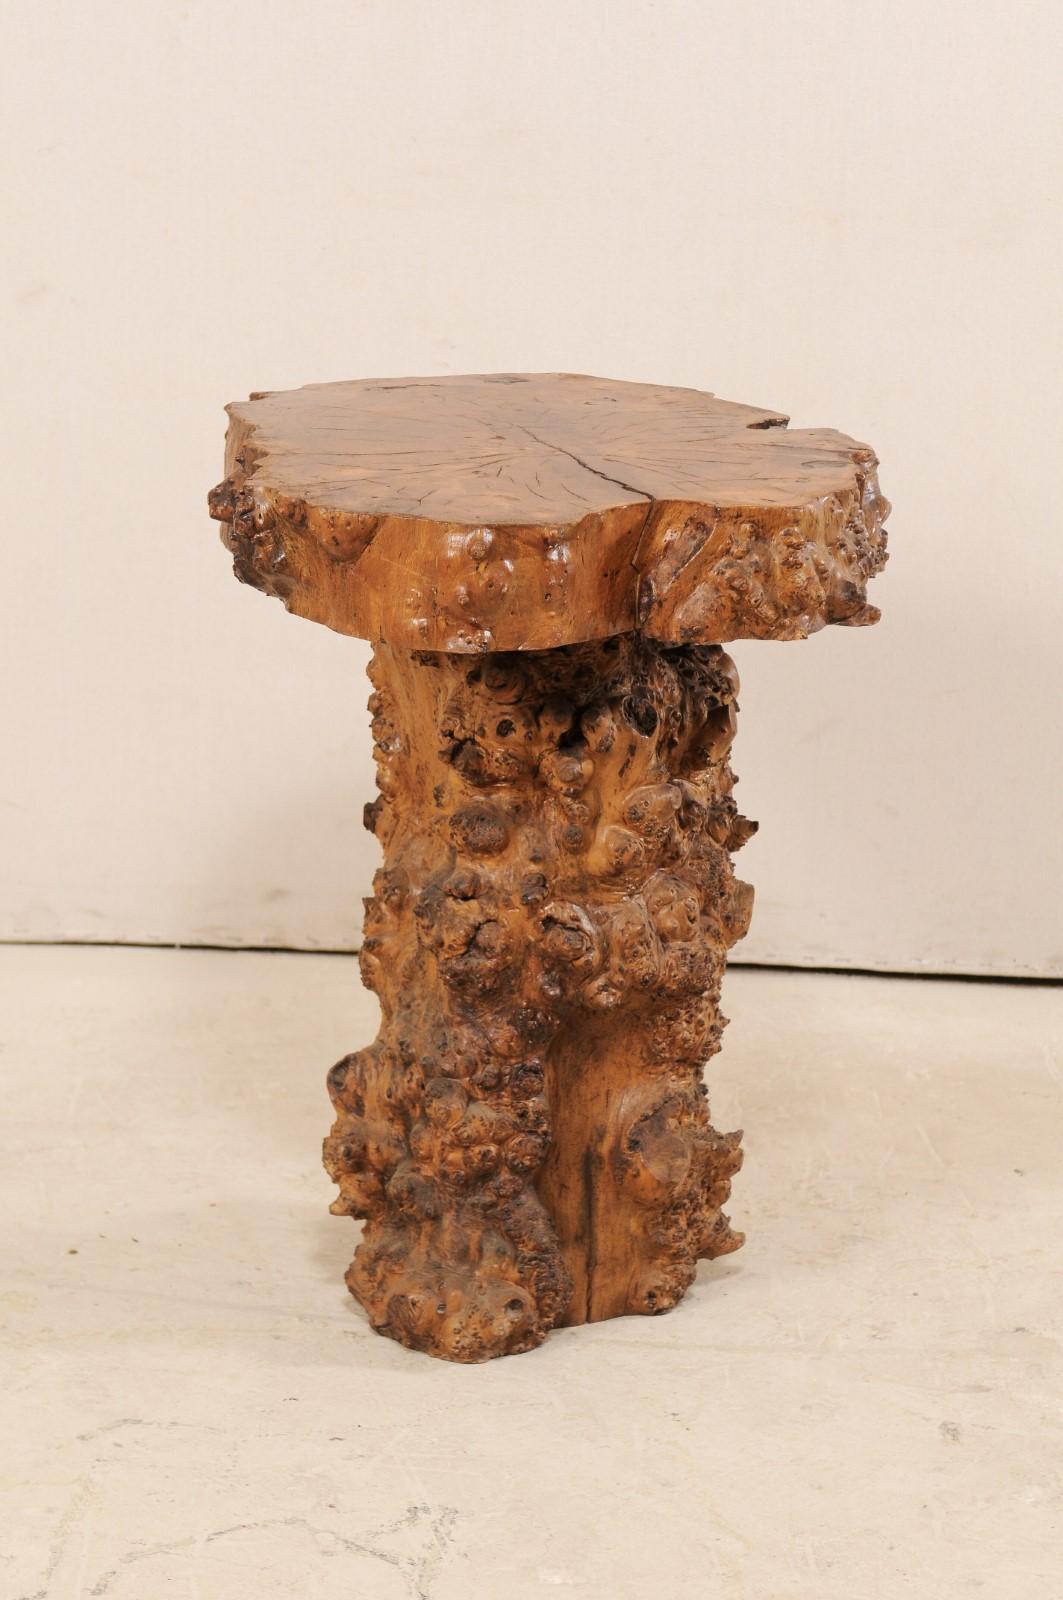 European Live-Edge Burl Side Table with Slab Top & Knobby Texture, Early 20th C. For Sale 4